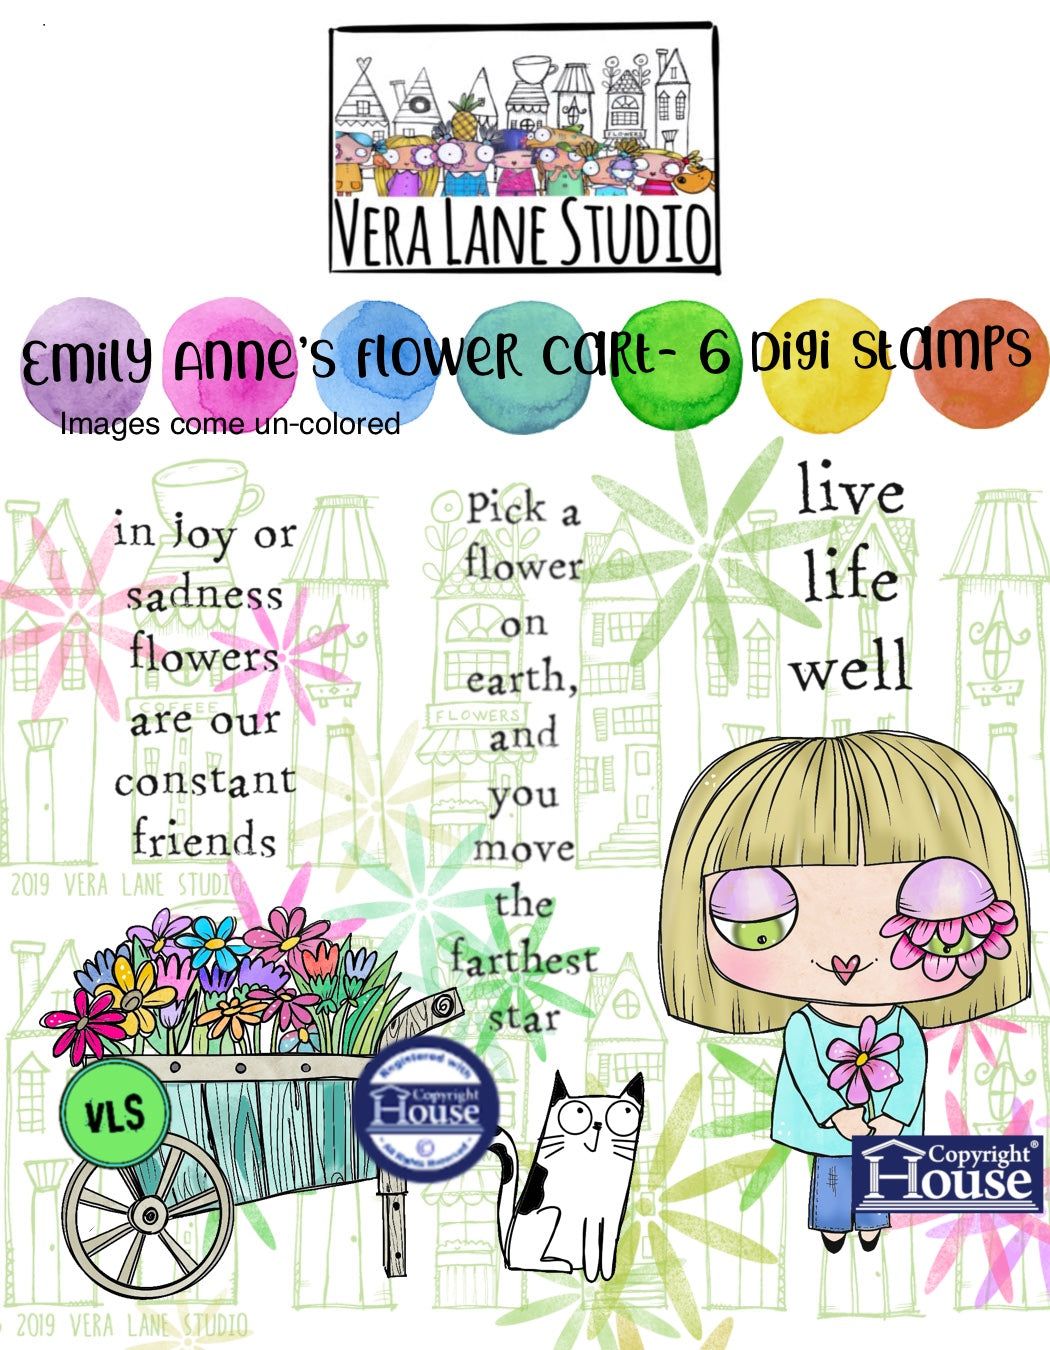 Emily Anne’s Flower Cart - 6 Digi stamps in jpg and png files